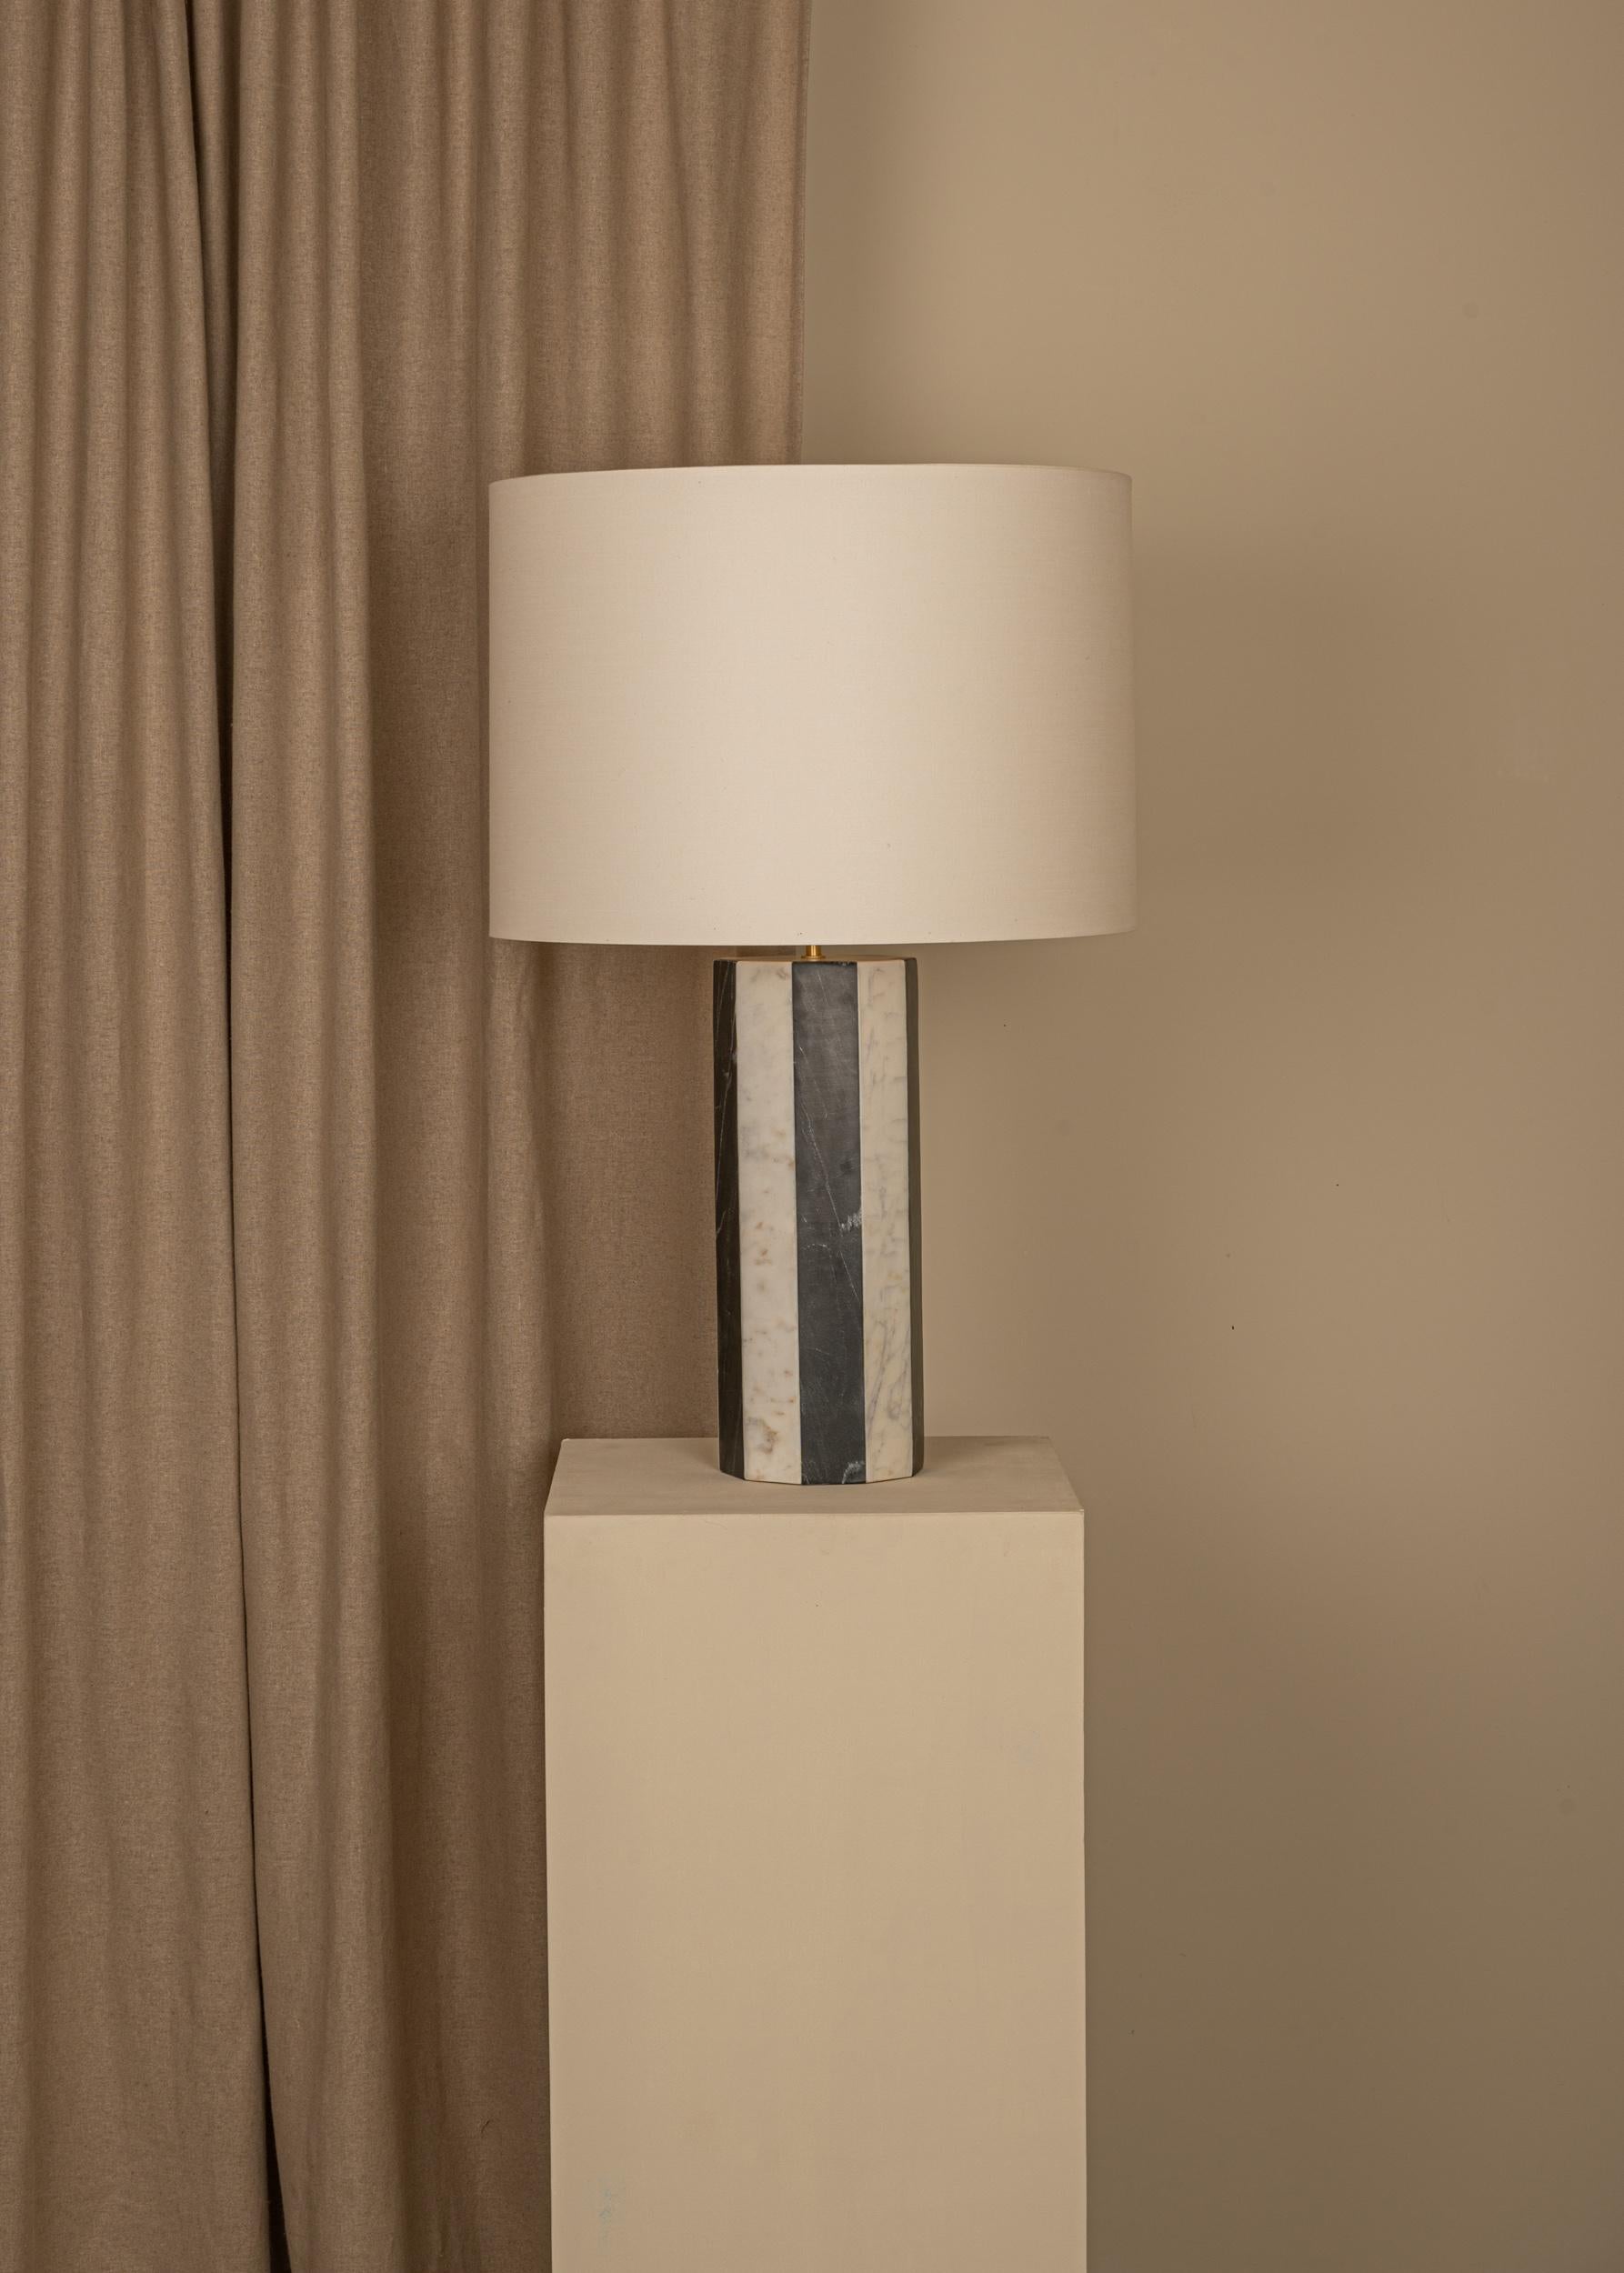 Black and White Marble Parizo Table Lamp by Simone & Marcel
Dimensions: Ø 50 x H 78 cm.
Materials: Cotton and marble.

Custom options available on request. Please contact us. 

All our lamps can be wired according to each country. If sold to the USA